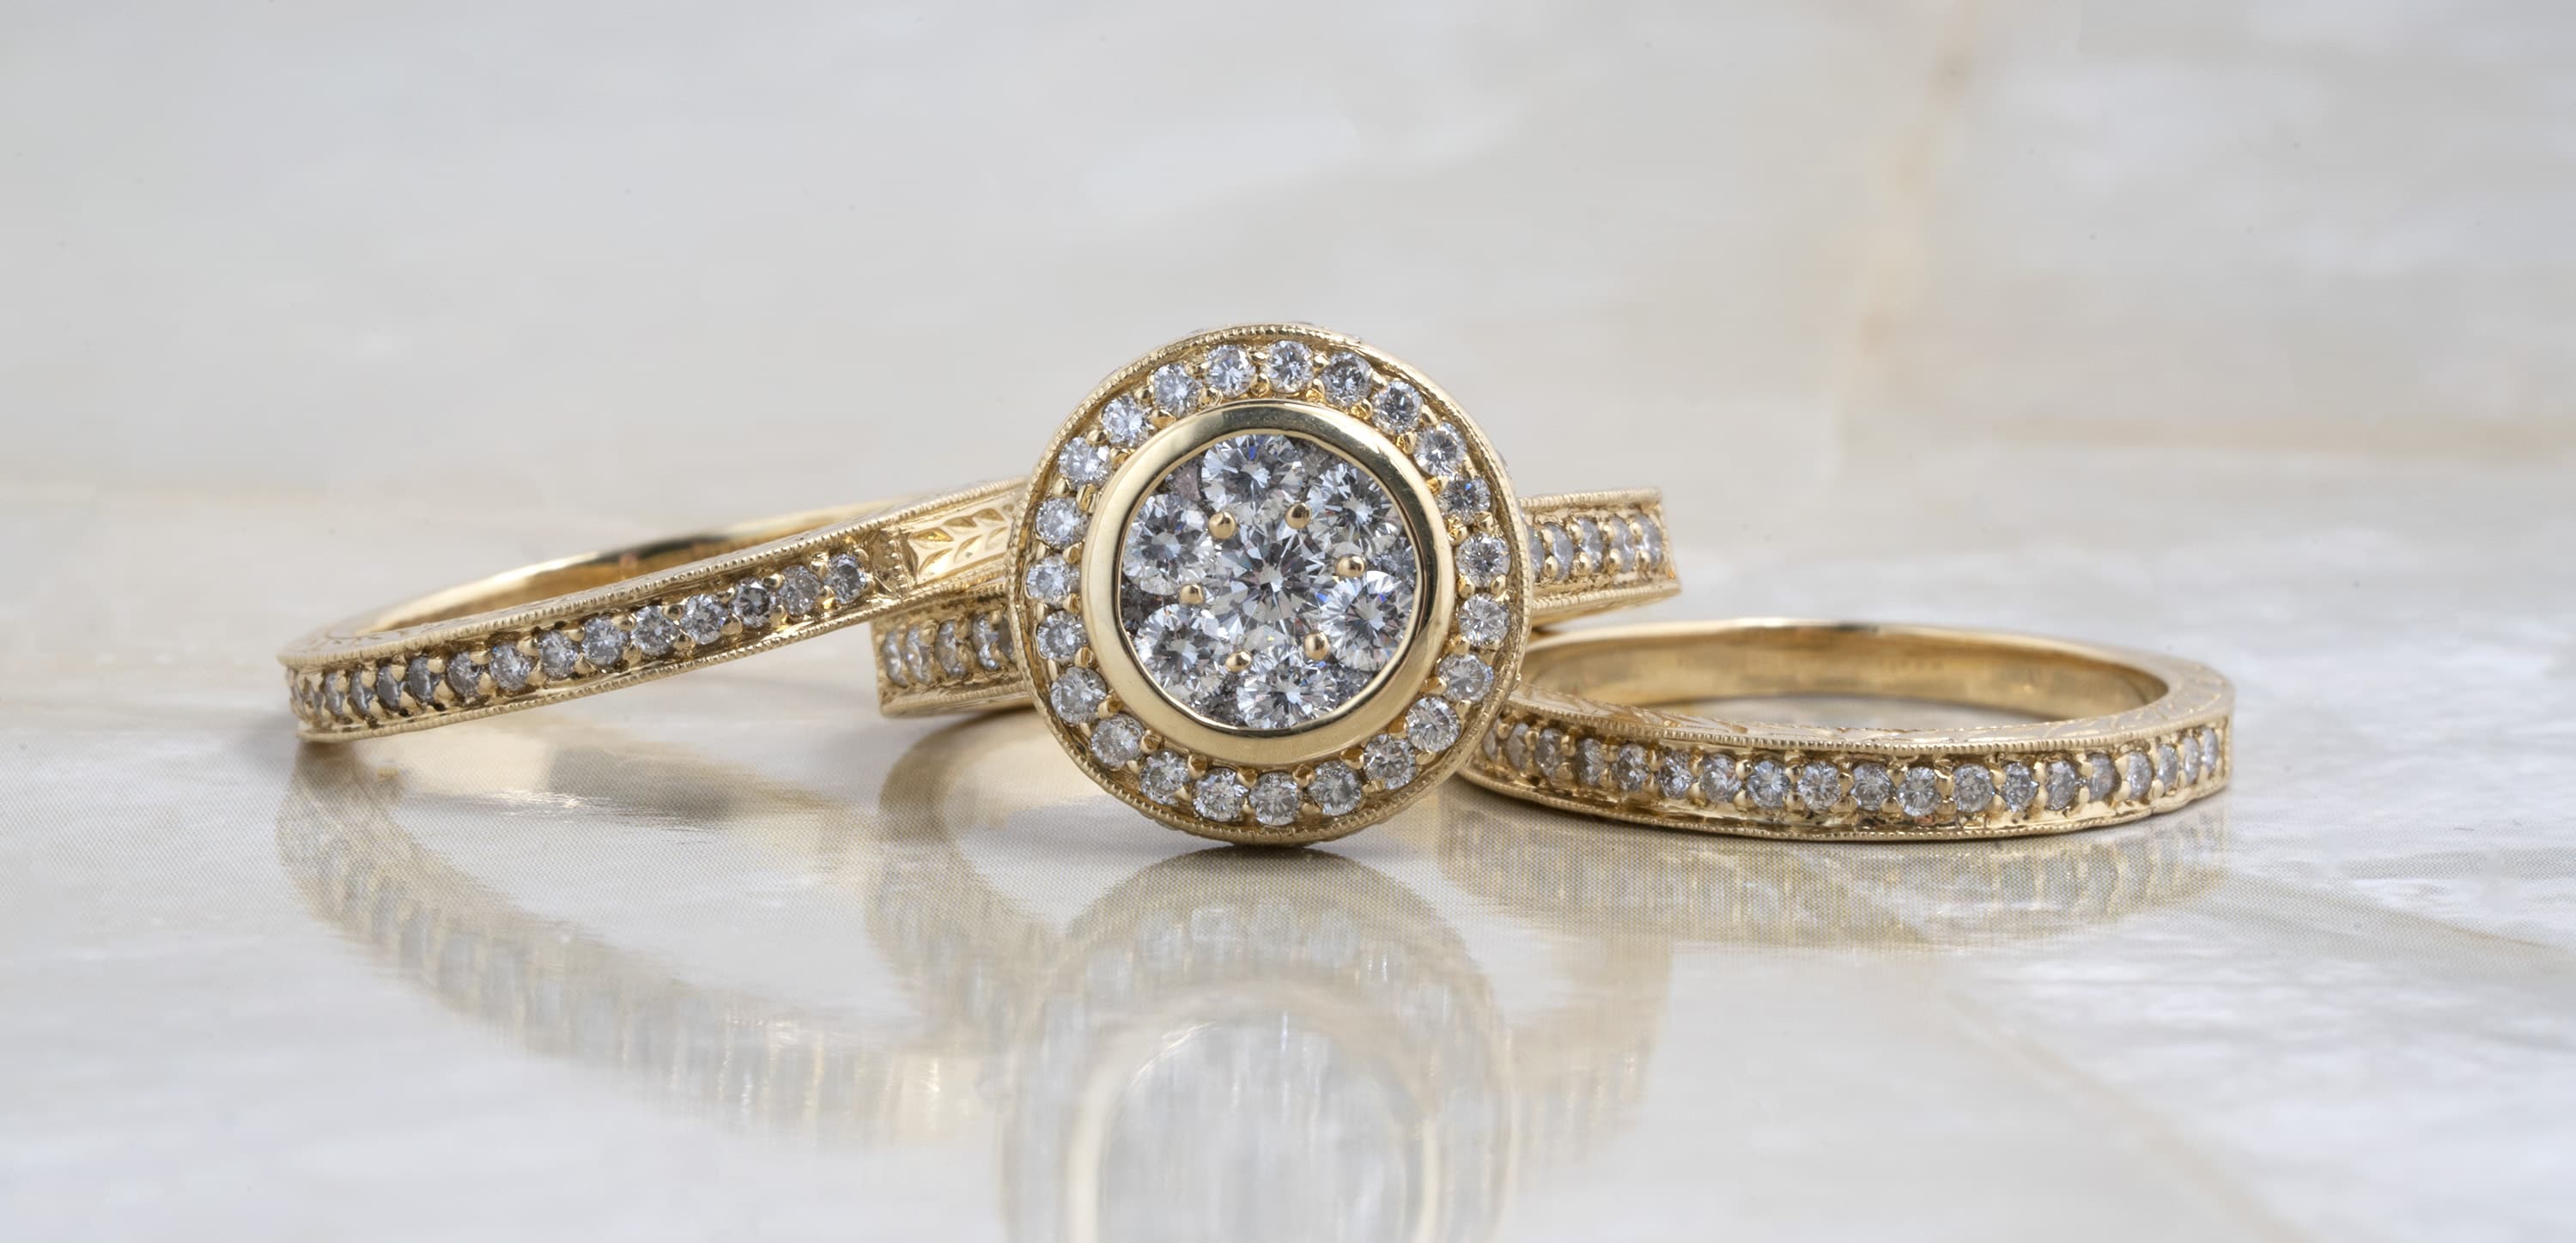 Yellow gold diamond engagement ring with matching diamond wedding bands on a marble table.